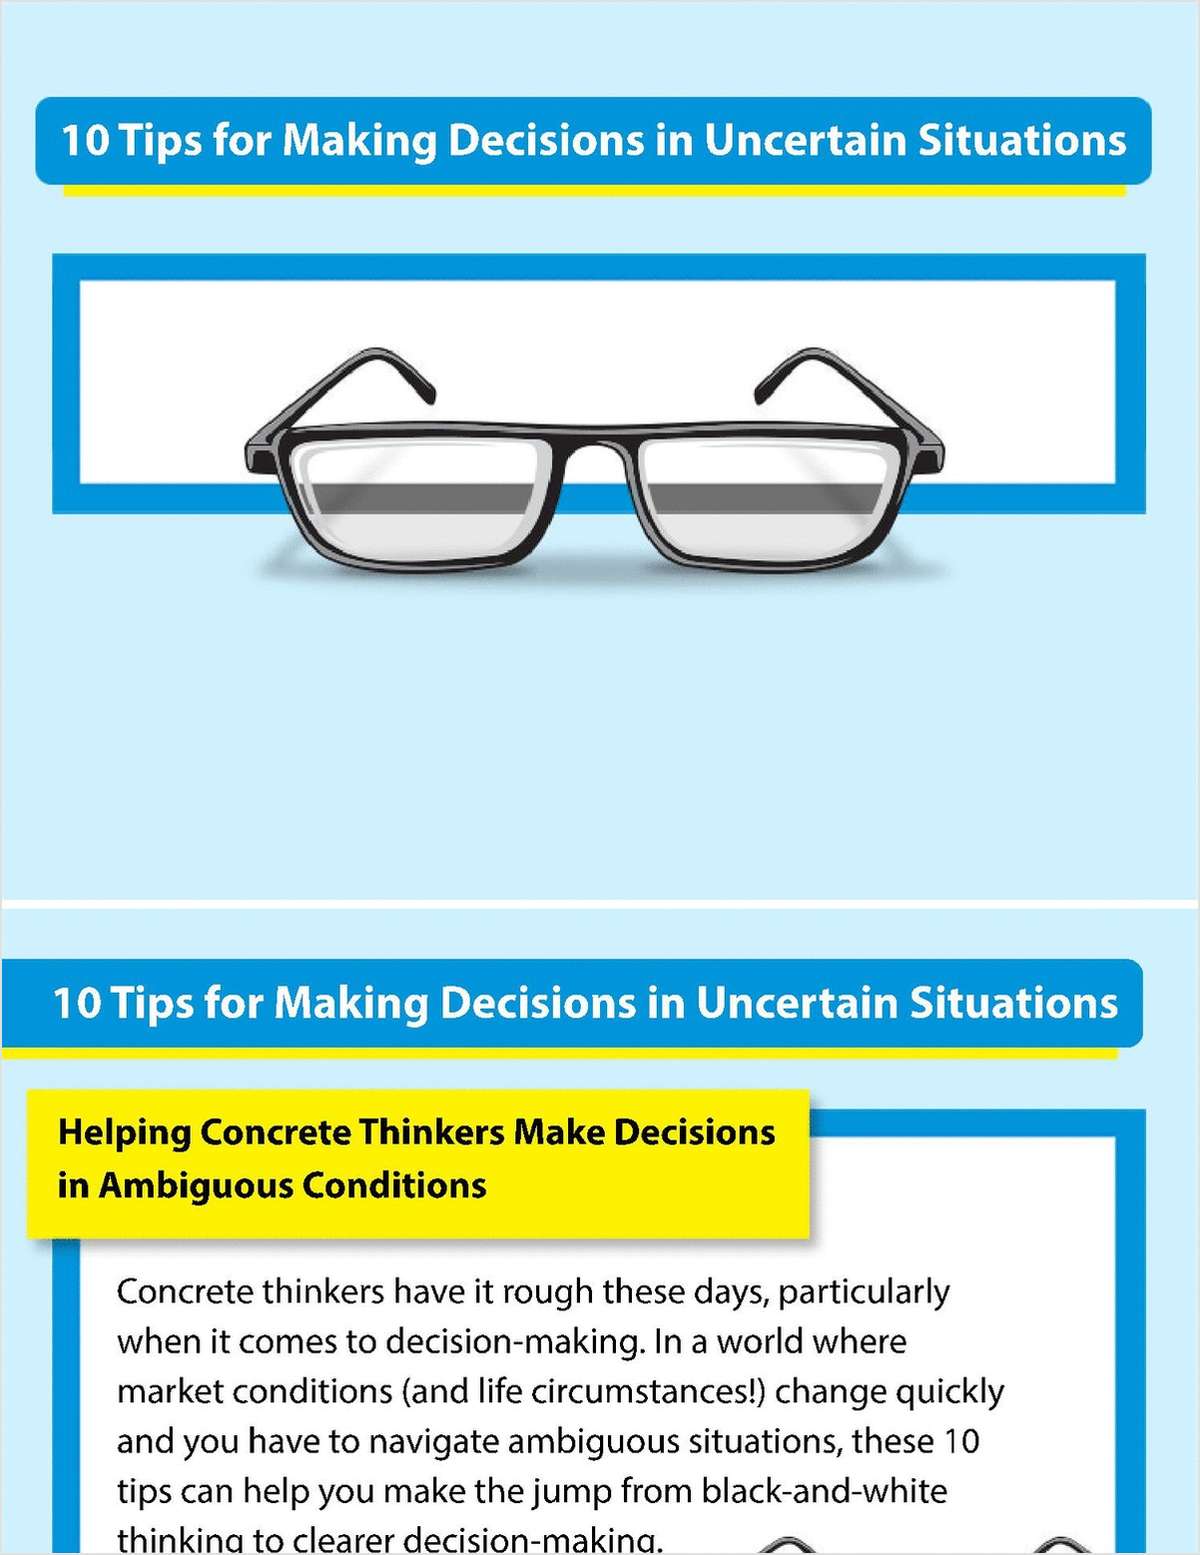 10 Tips for Making Decisions in Uncertain Situations